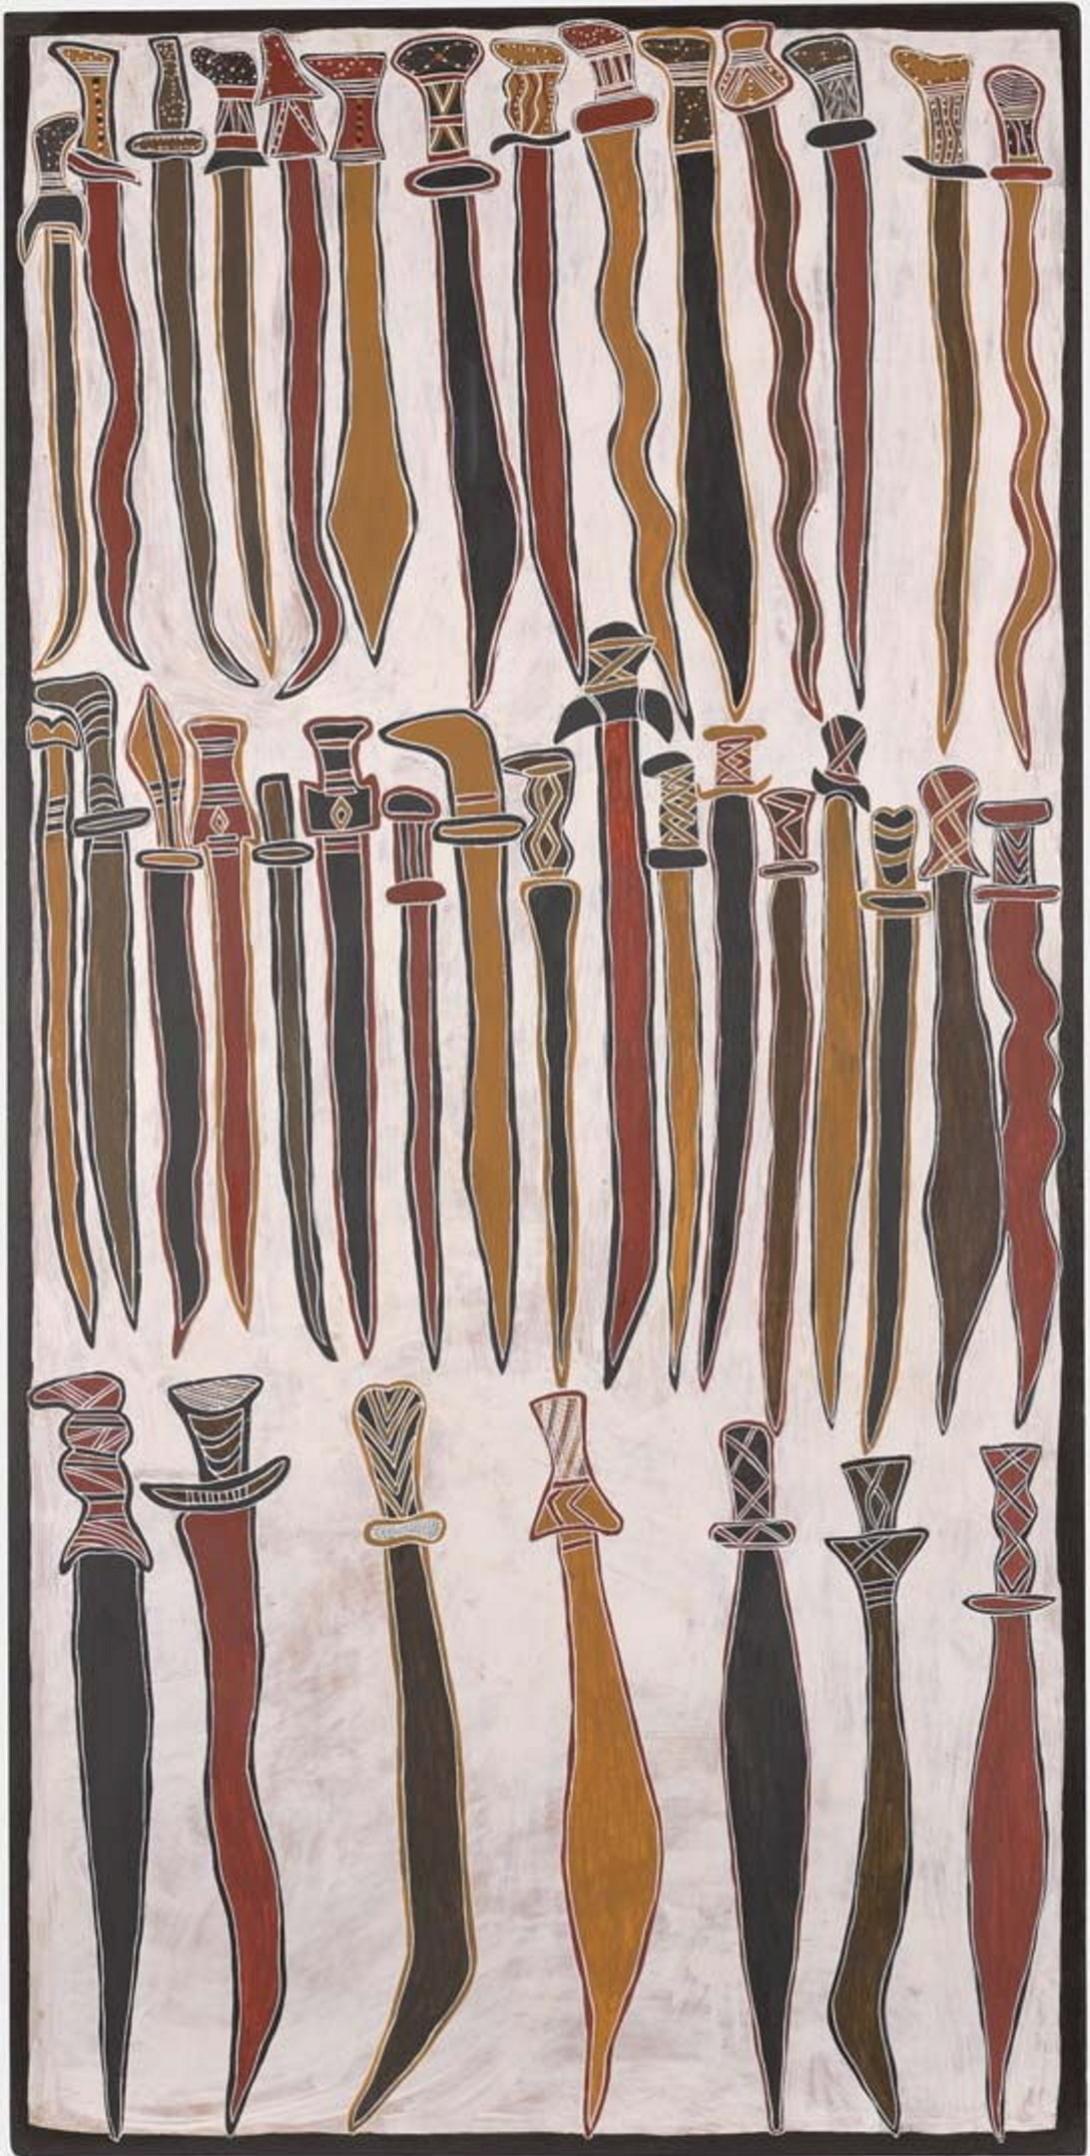 A painting of knives made in natural pigments on bark.